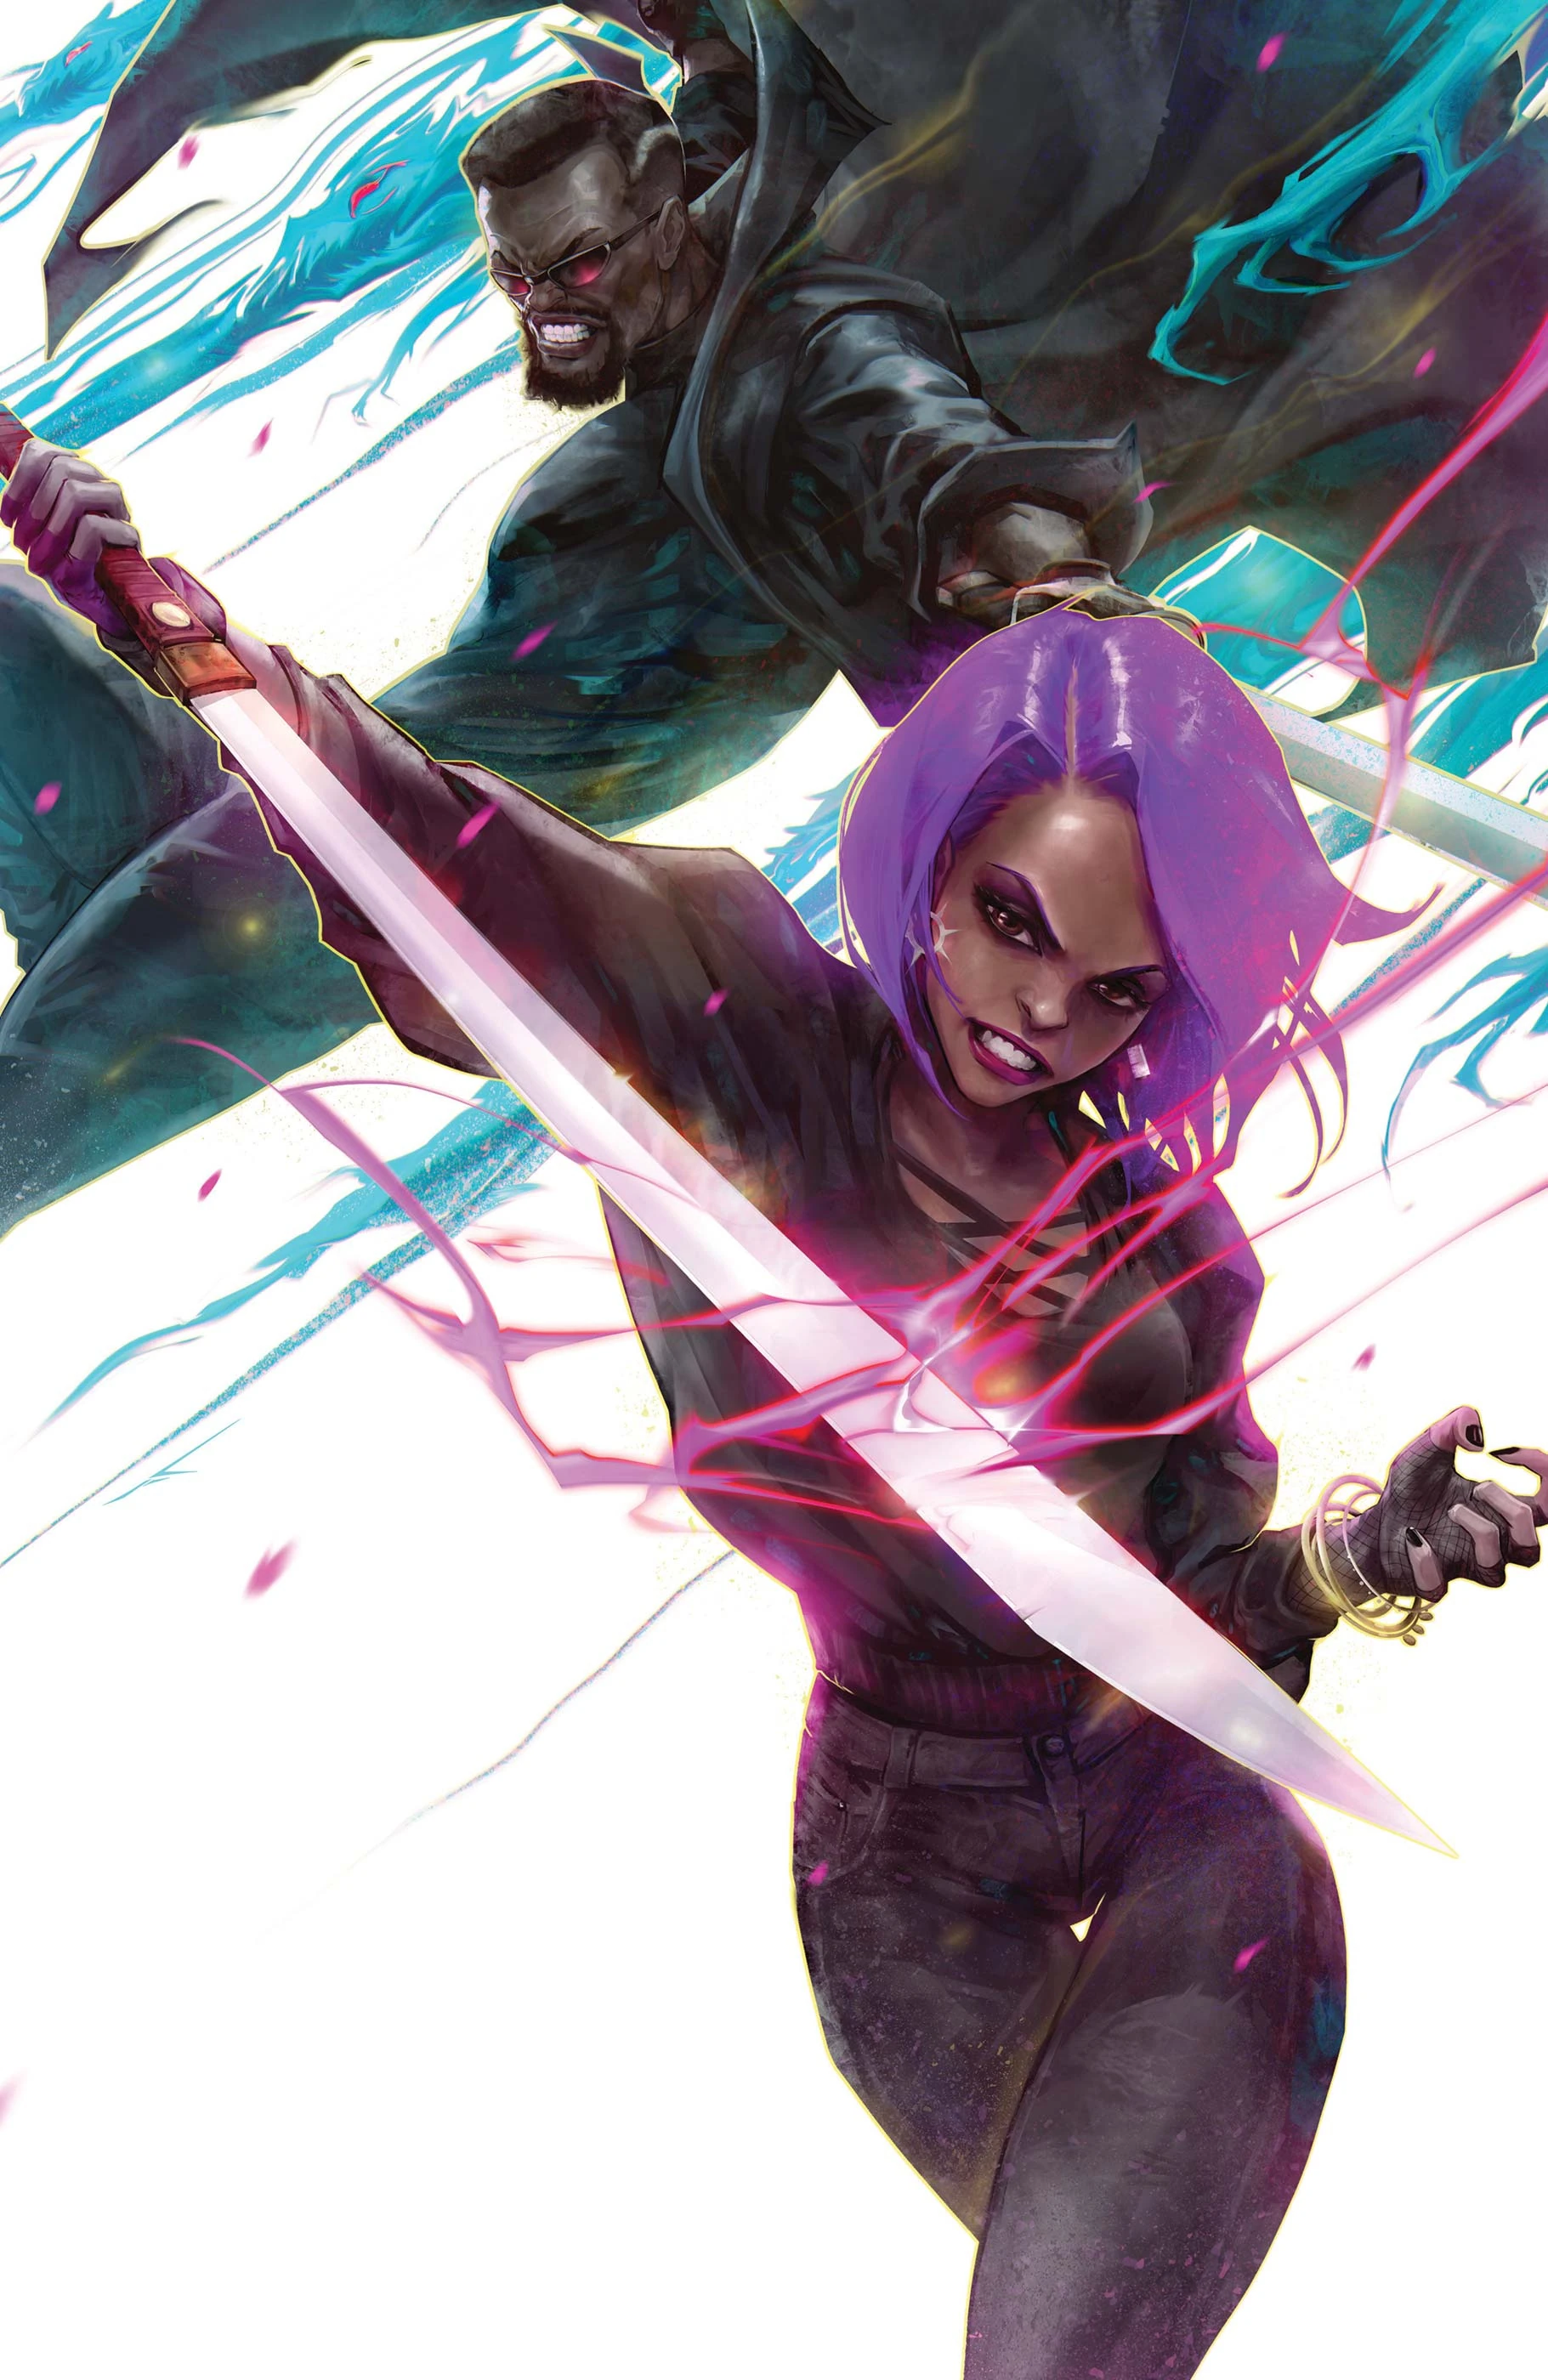 Blade and his daughter, Brielle, as depicted on Ivan Tao's variant cover to Bloodline: Daughter of Blade Vol. 1 #2 (2023), Marvel Entertainment